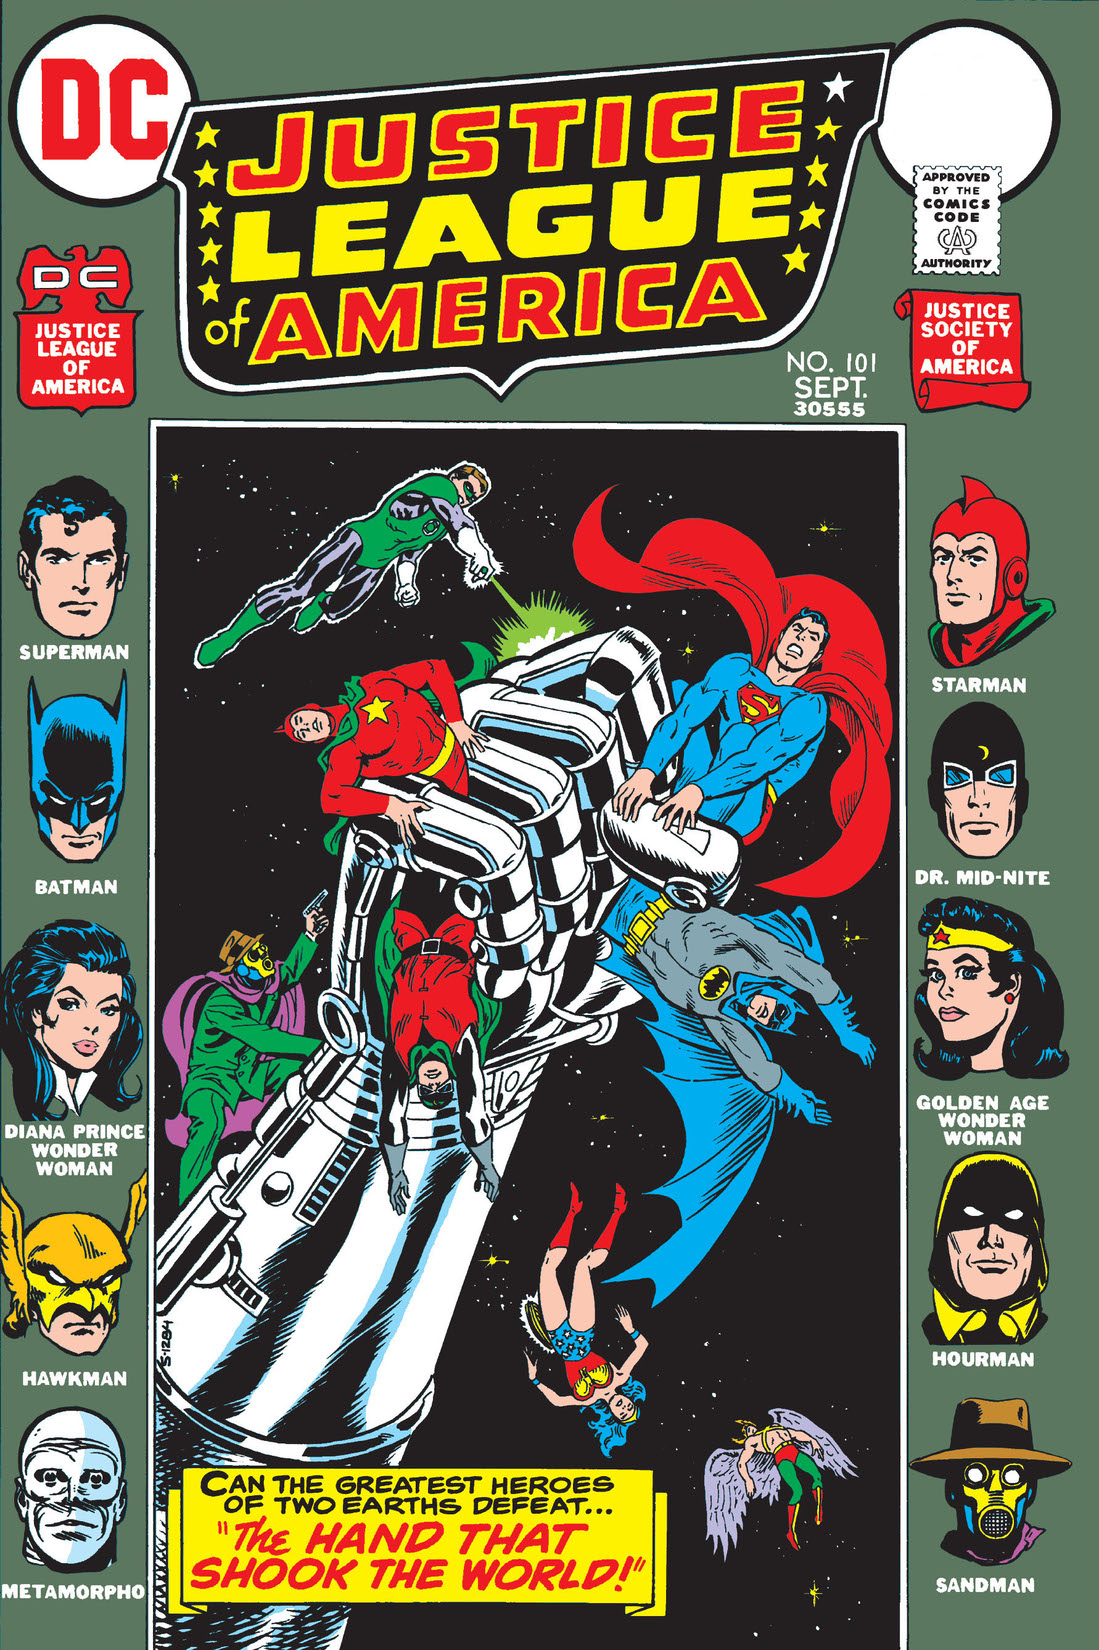 Justice League of America (1960-) #101 preview images